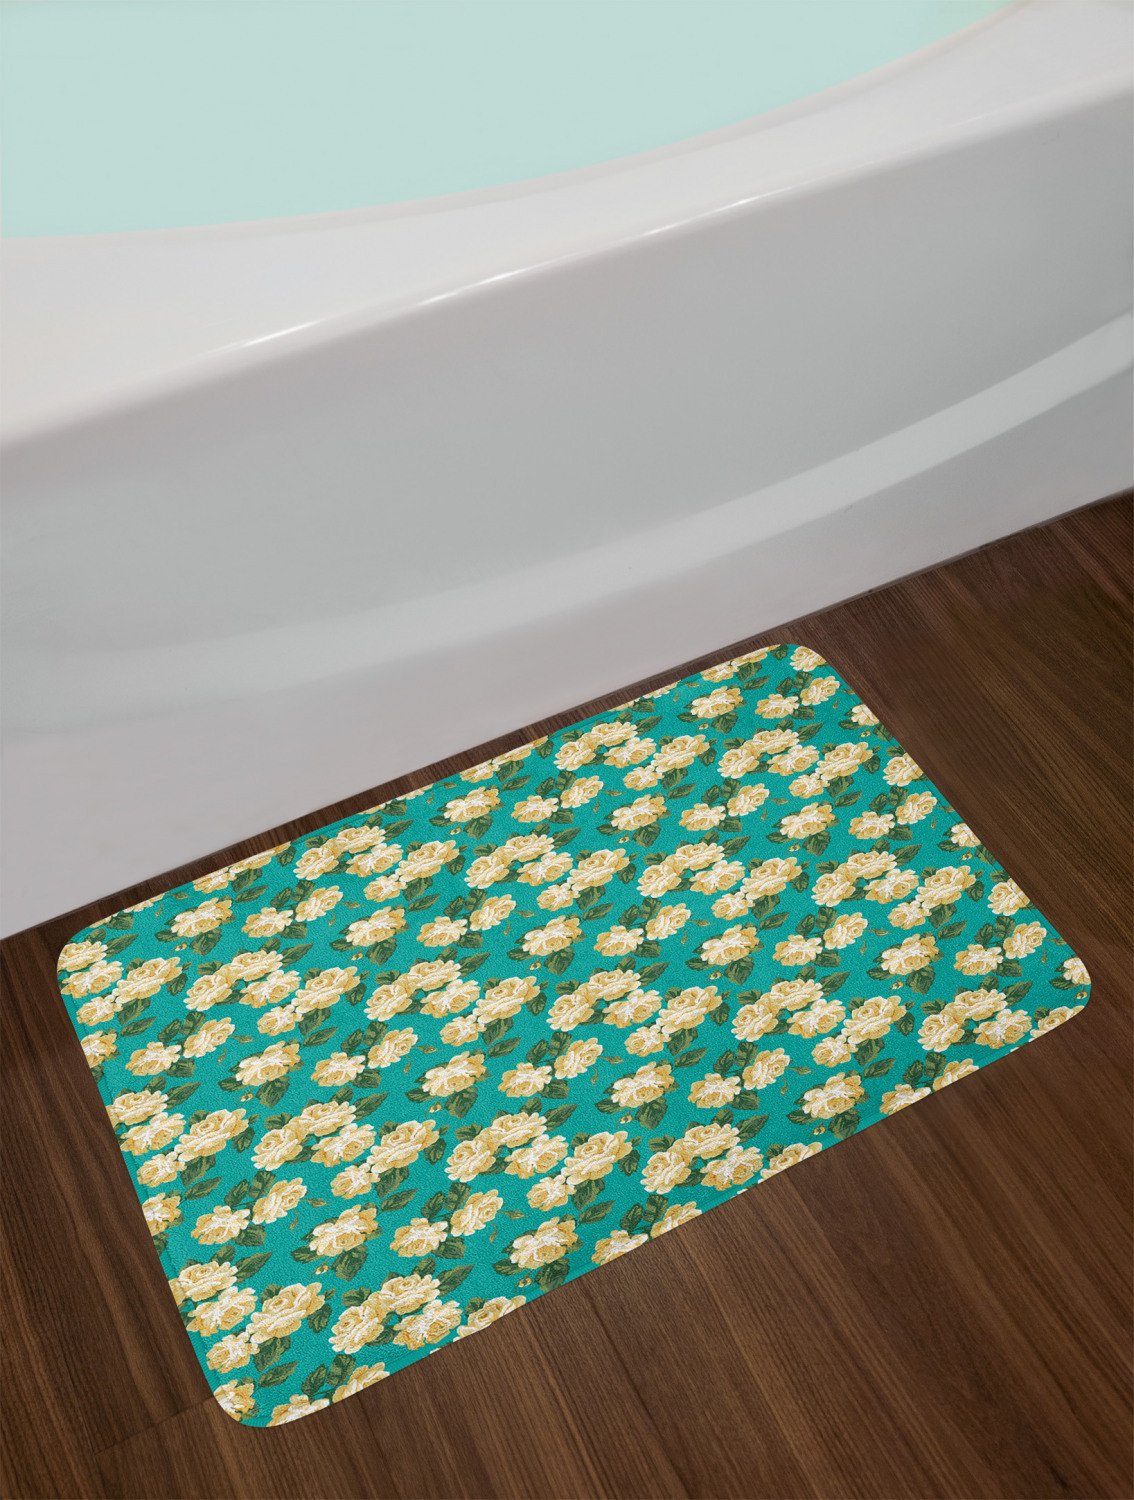 Blue and Yellow Bathroom Decor New Blue and Yellow Bath Mat Bathroom Decor Plush Non Slip Mat 29 5&quot; X 17 5&quot;